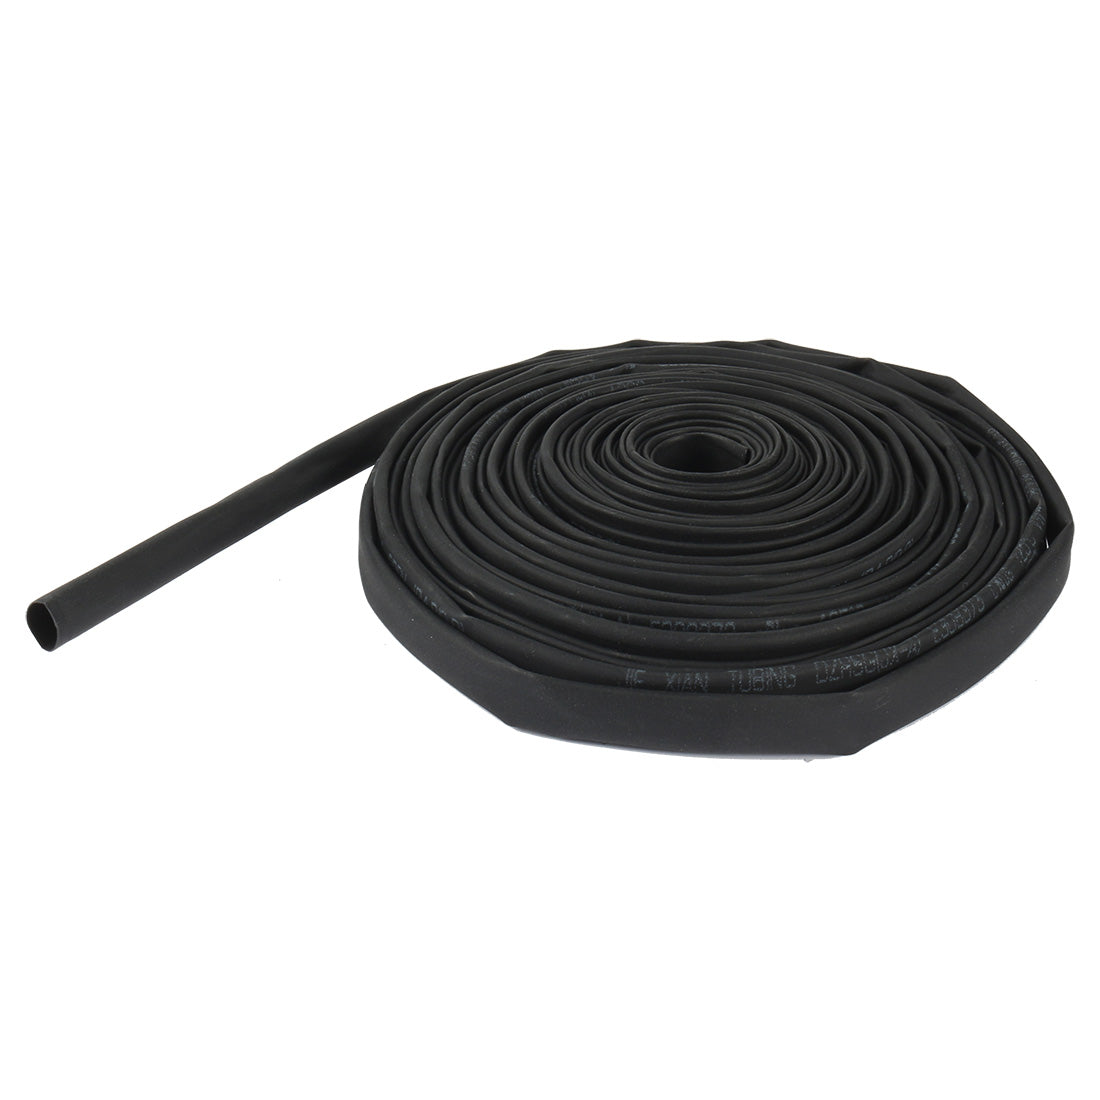 uxcell Uxcell 4mm 2:1 rate Heat Shrink Tube Wire Wrap Cable Sleeve Tubing 6 Meters Length Black